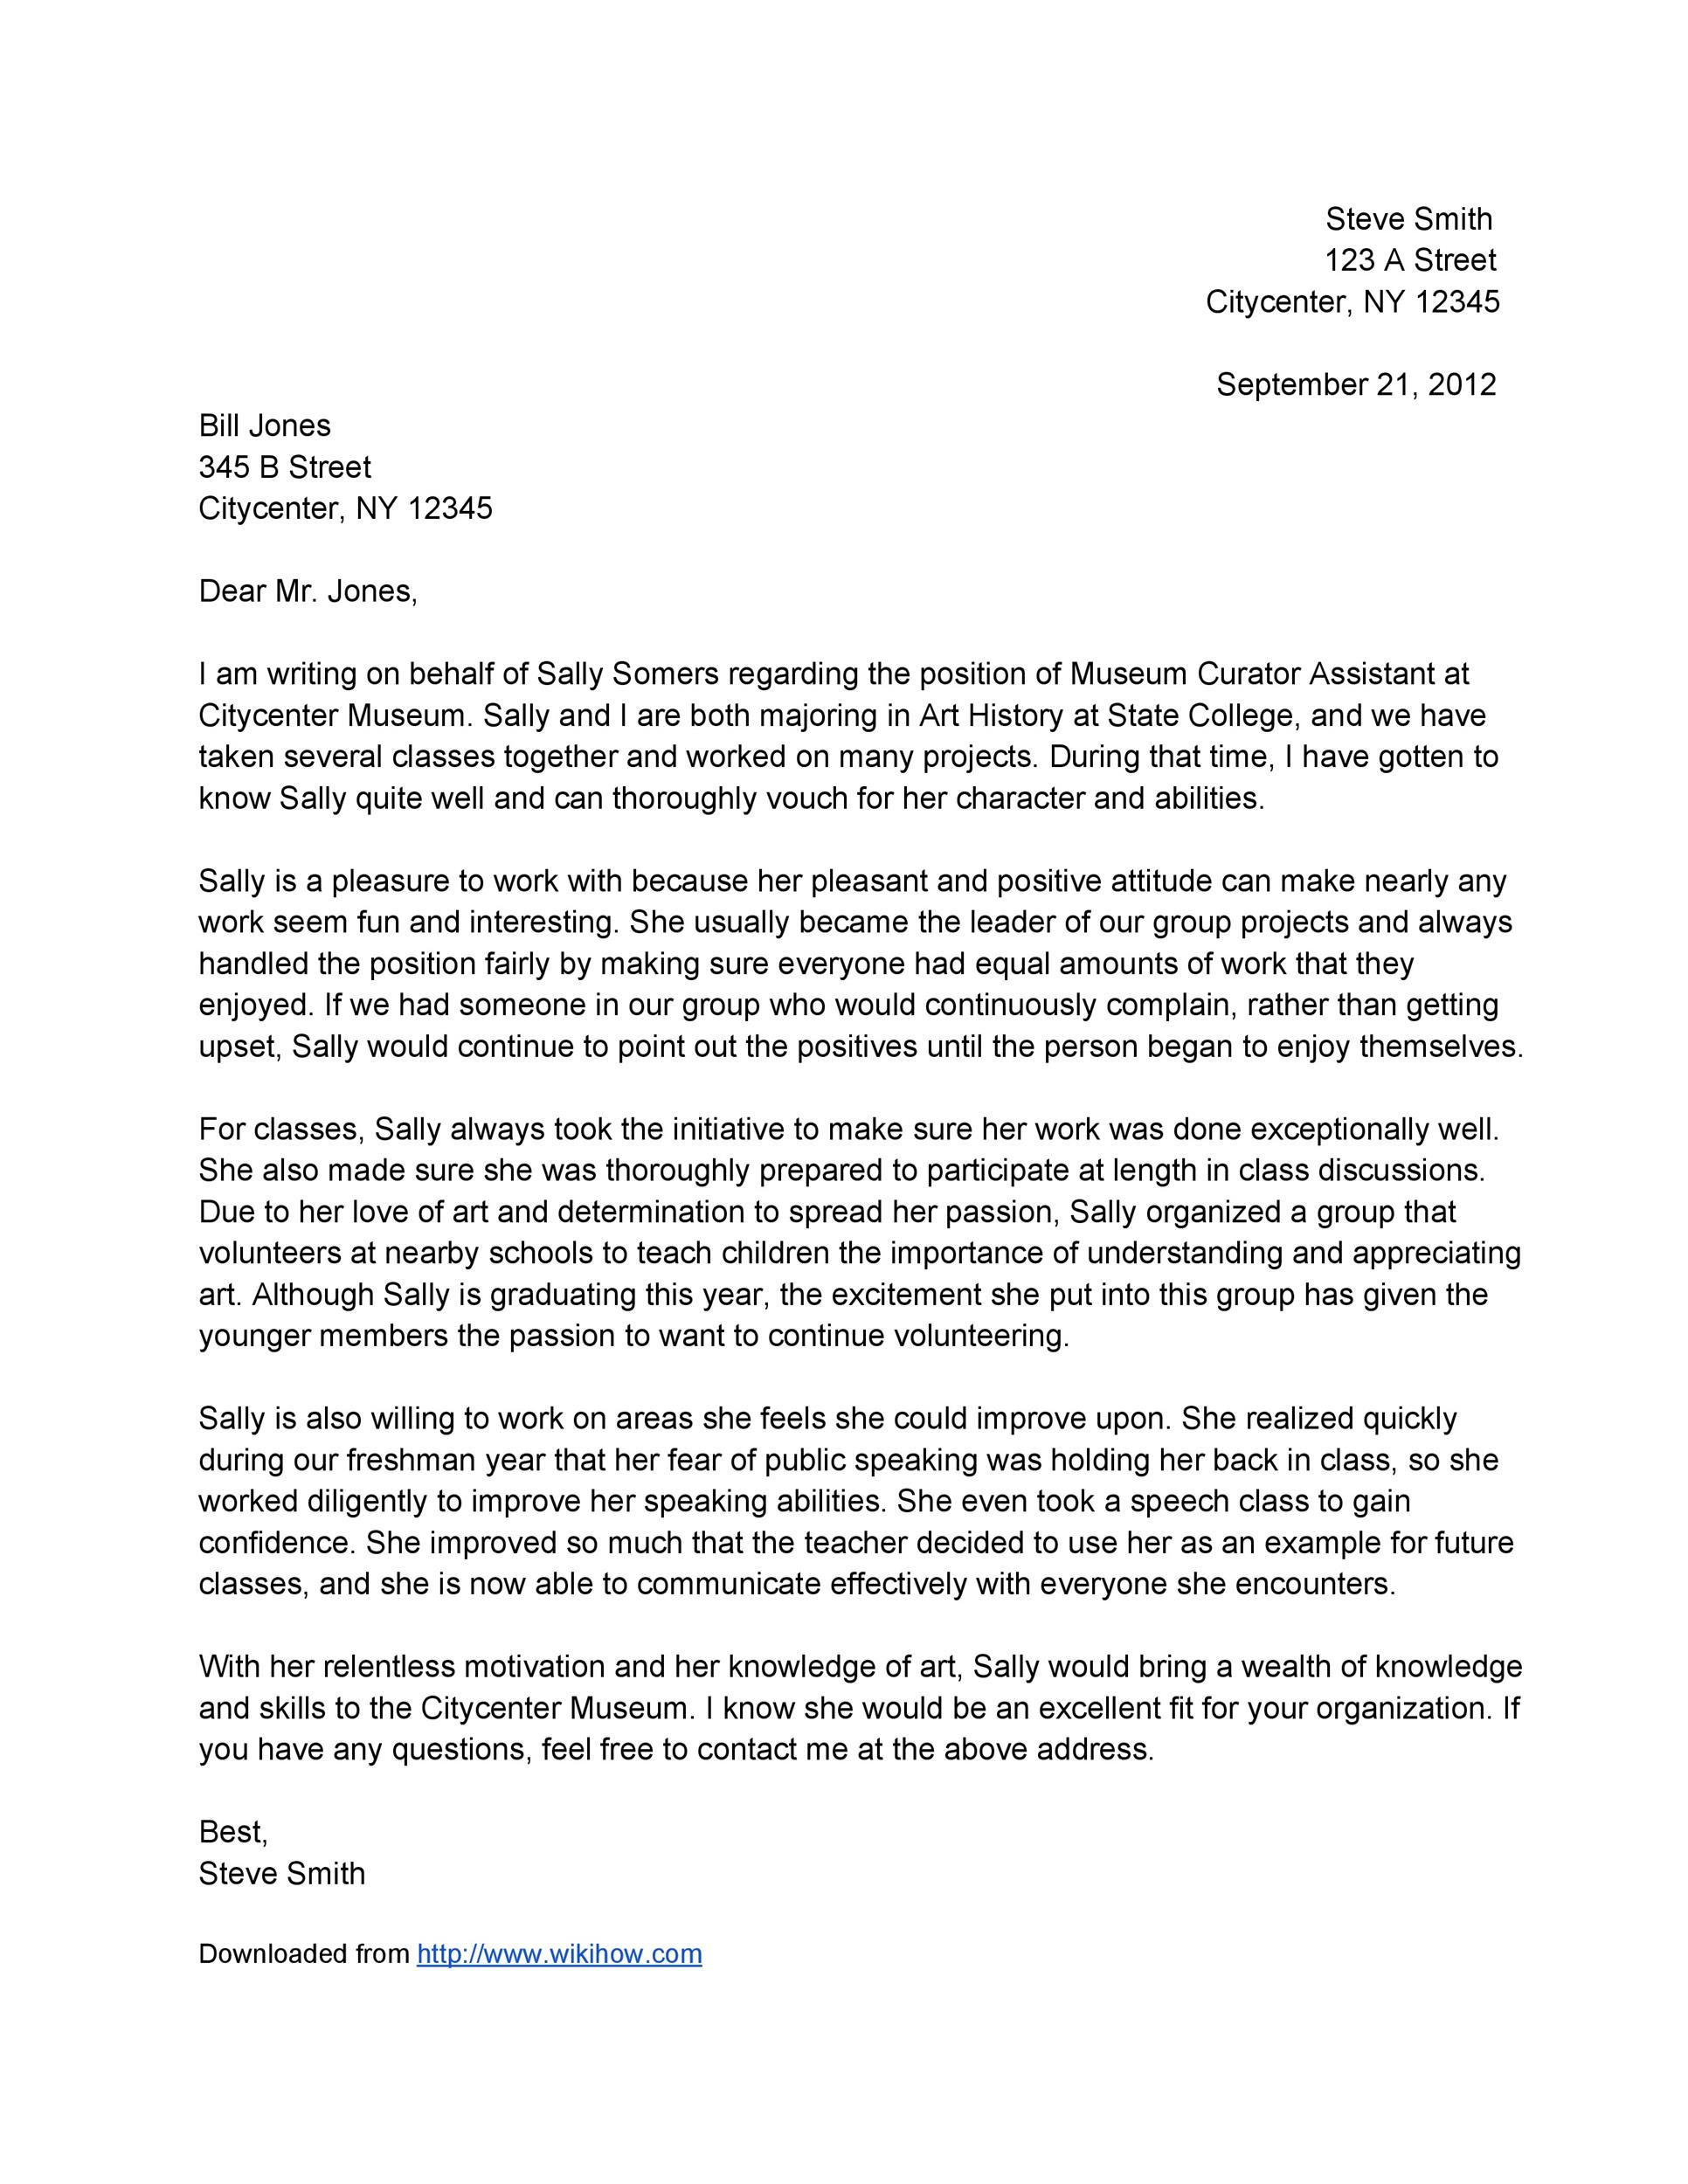 Professional Letter Of Recommendation from templatelab.com